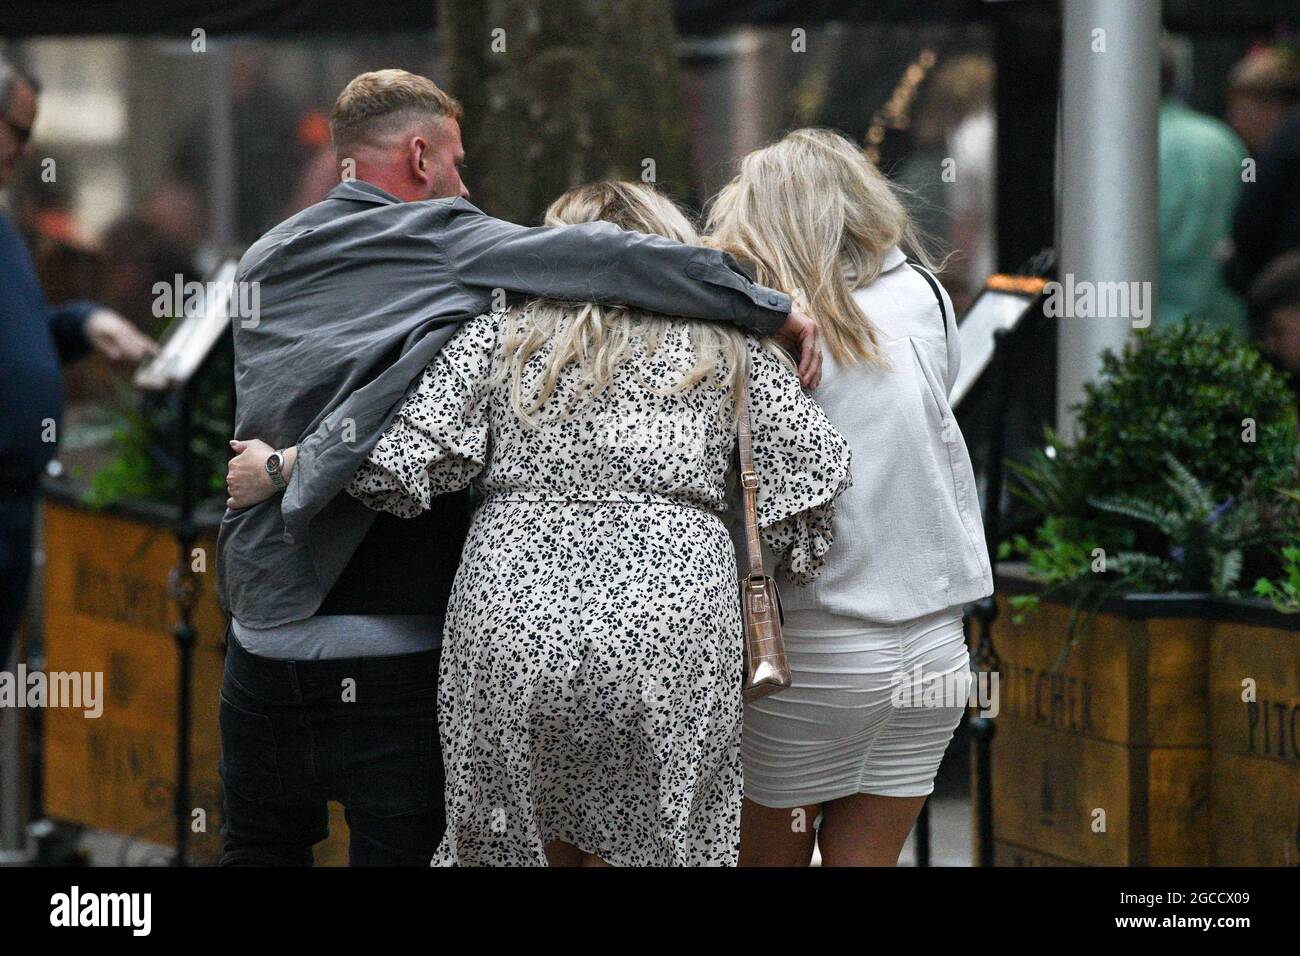 A drunk man holds onto two girls on Wind Street in Swansea, on Saturday night as nightclubs open across Wales for the first time since the start of the pandemic, as well as facemask restriction being no longer mandatory inside pubs. Stock Photo